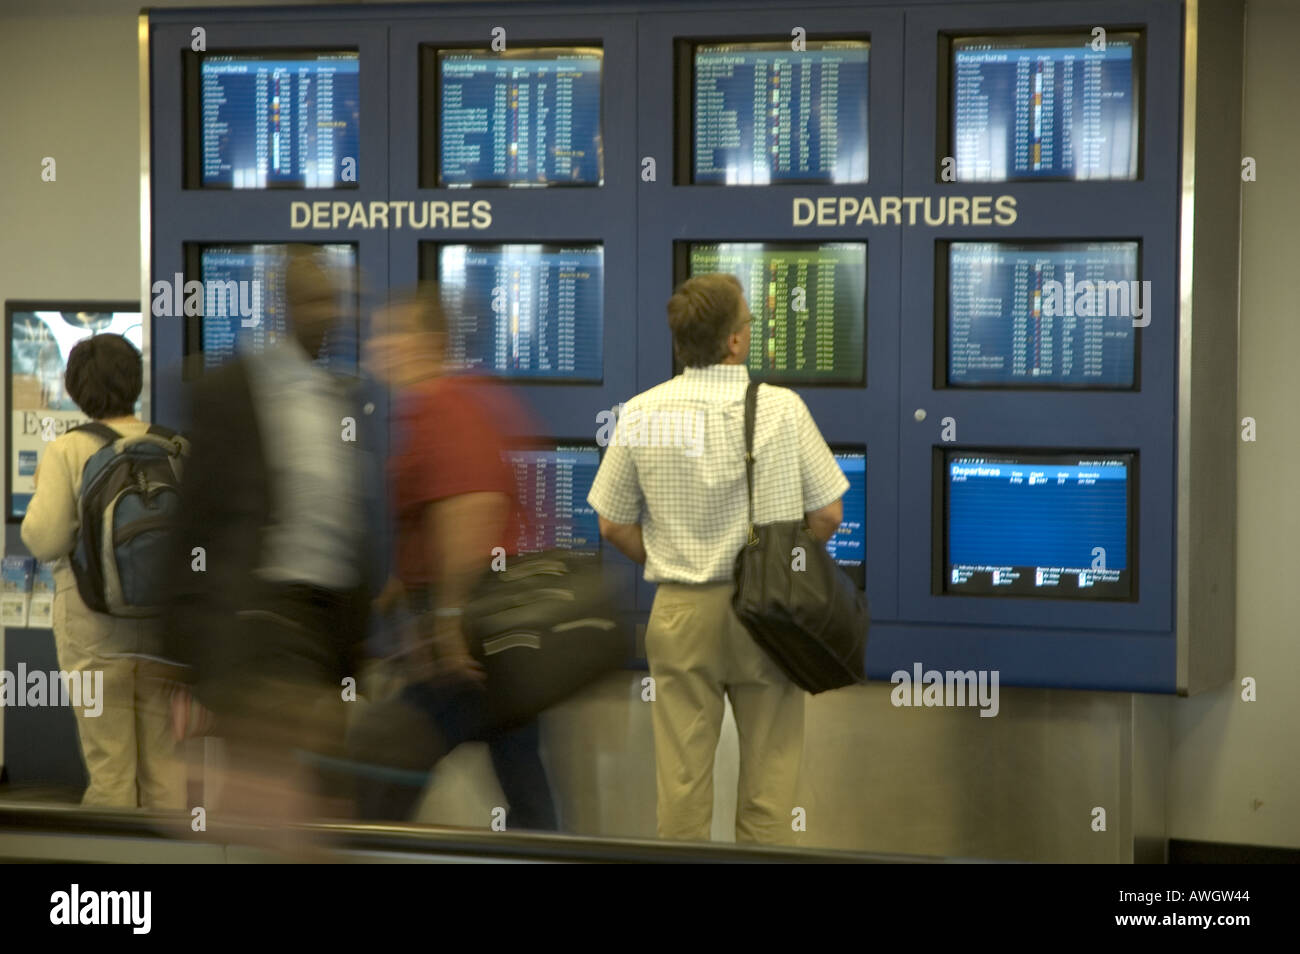 Hurried travelers pass airline schedules in Detroit, Michigan. Stock Photo